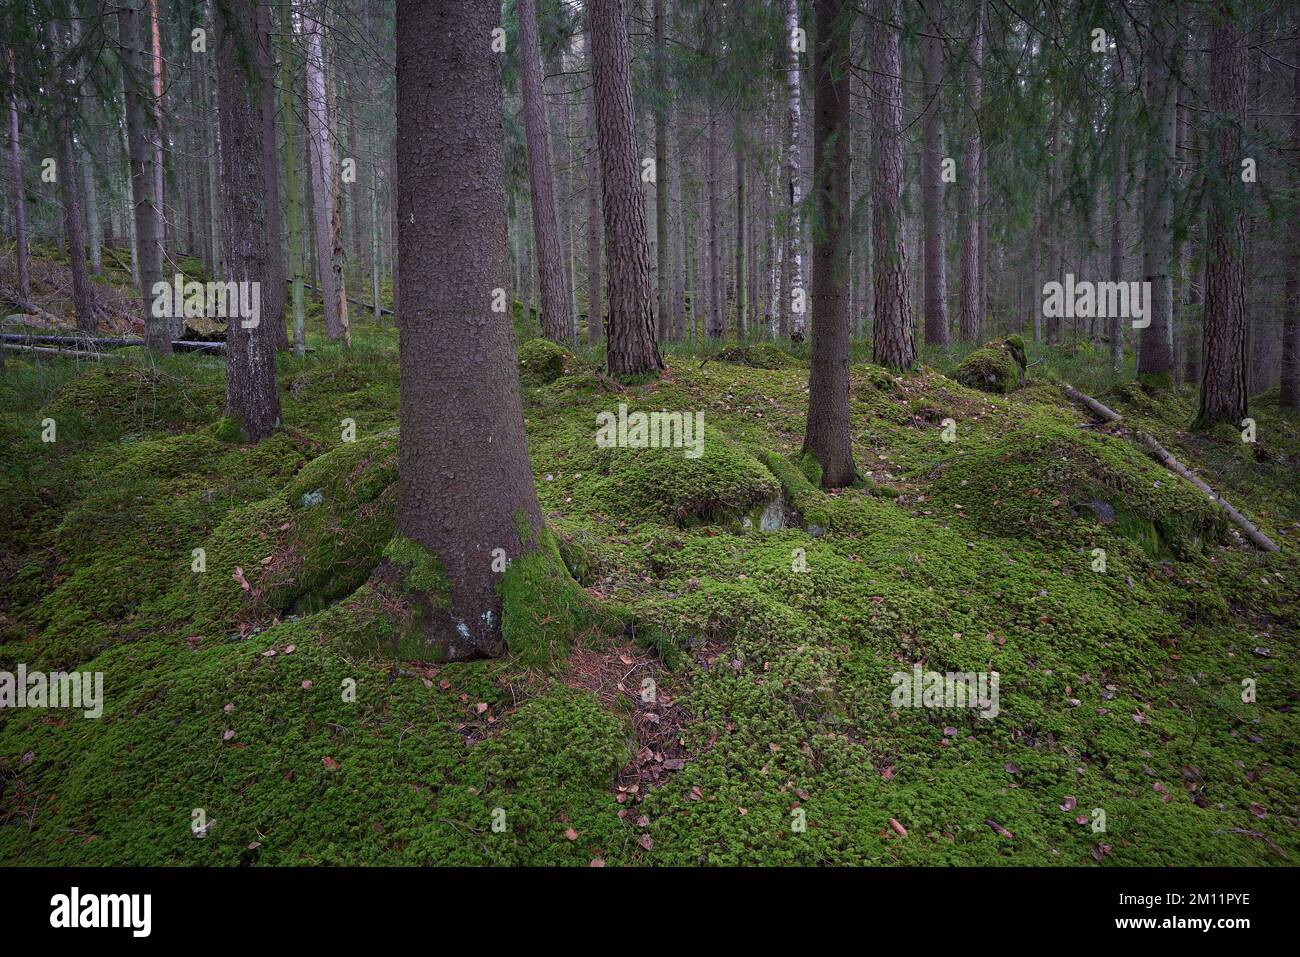 Sweden, Värmland, Degerfors, sprucetree forest with green mosscovered ground Stock Photo